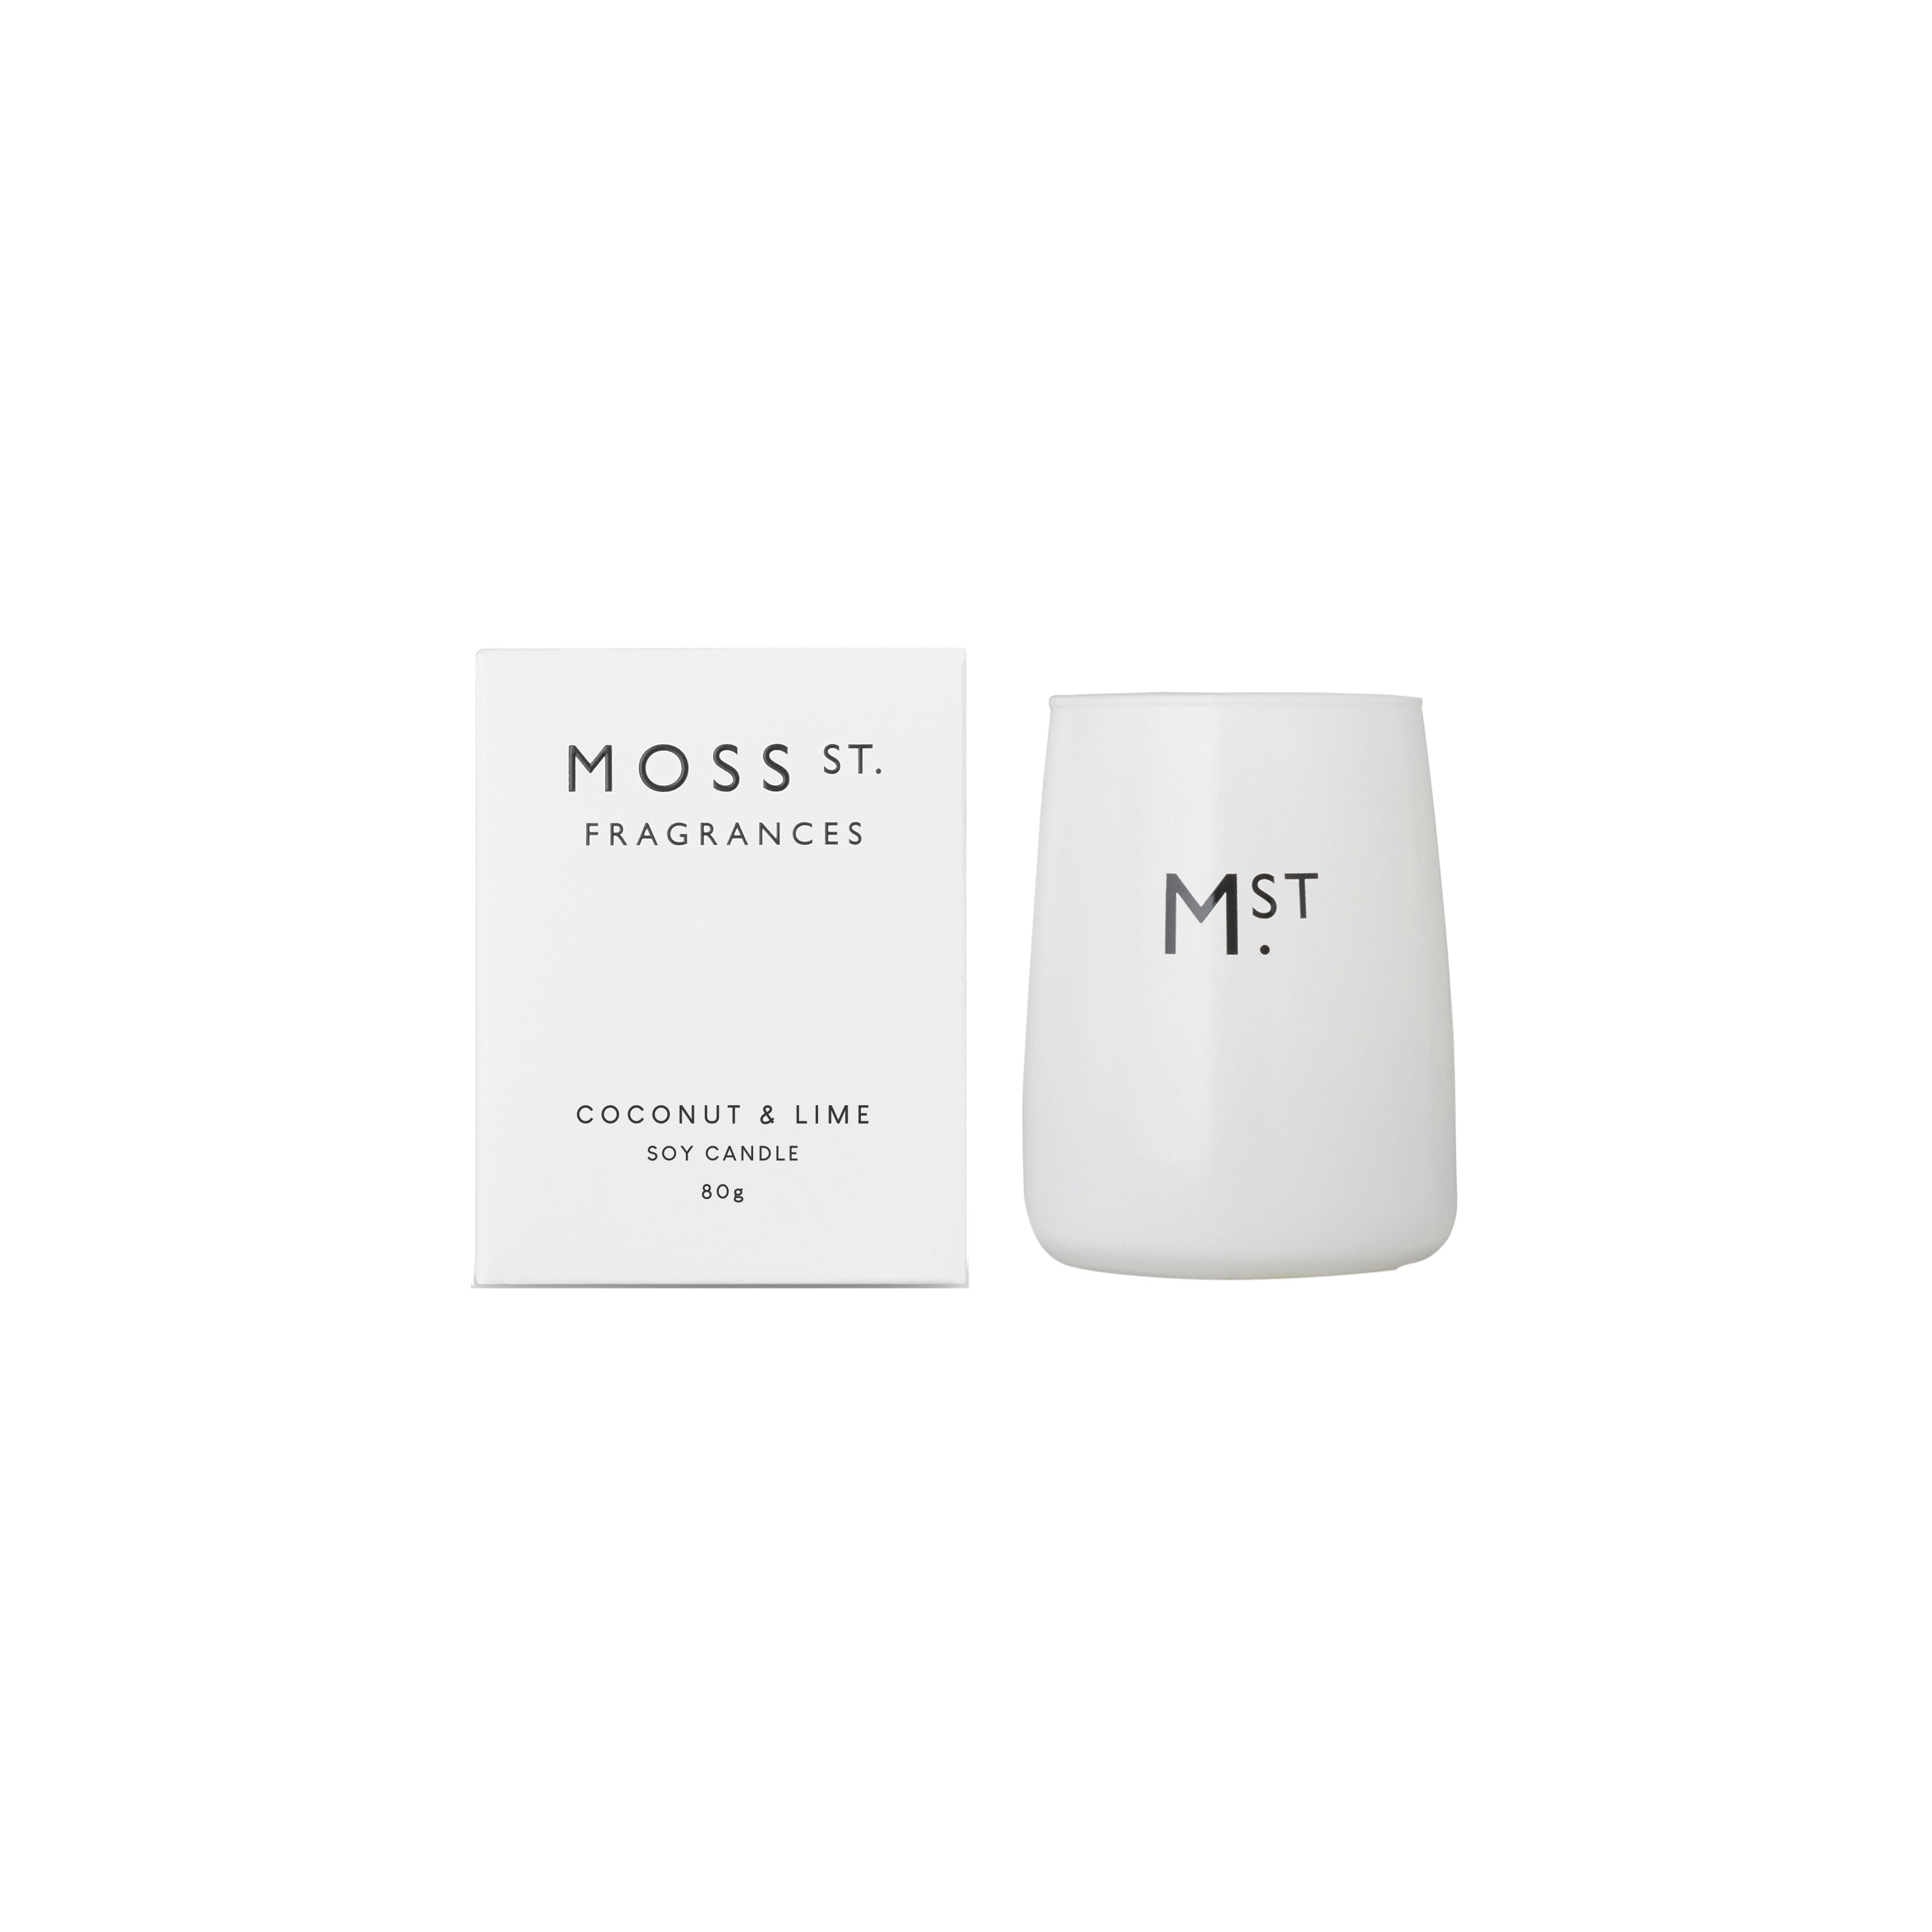 Moss St Coconut & Lime Soy Candle 80g